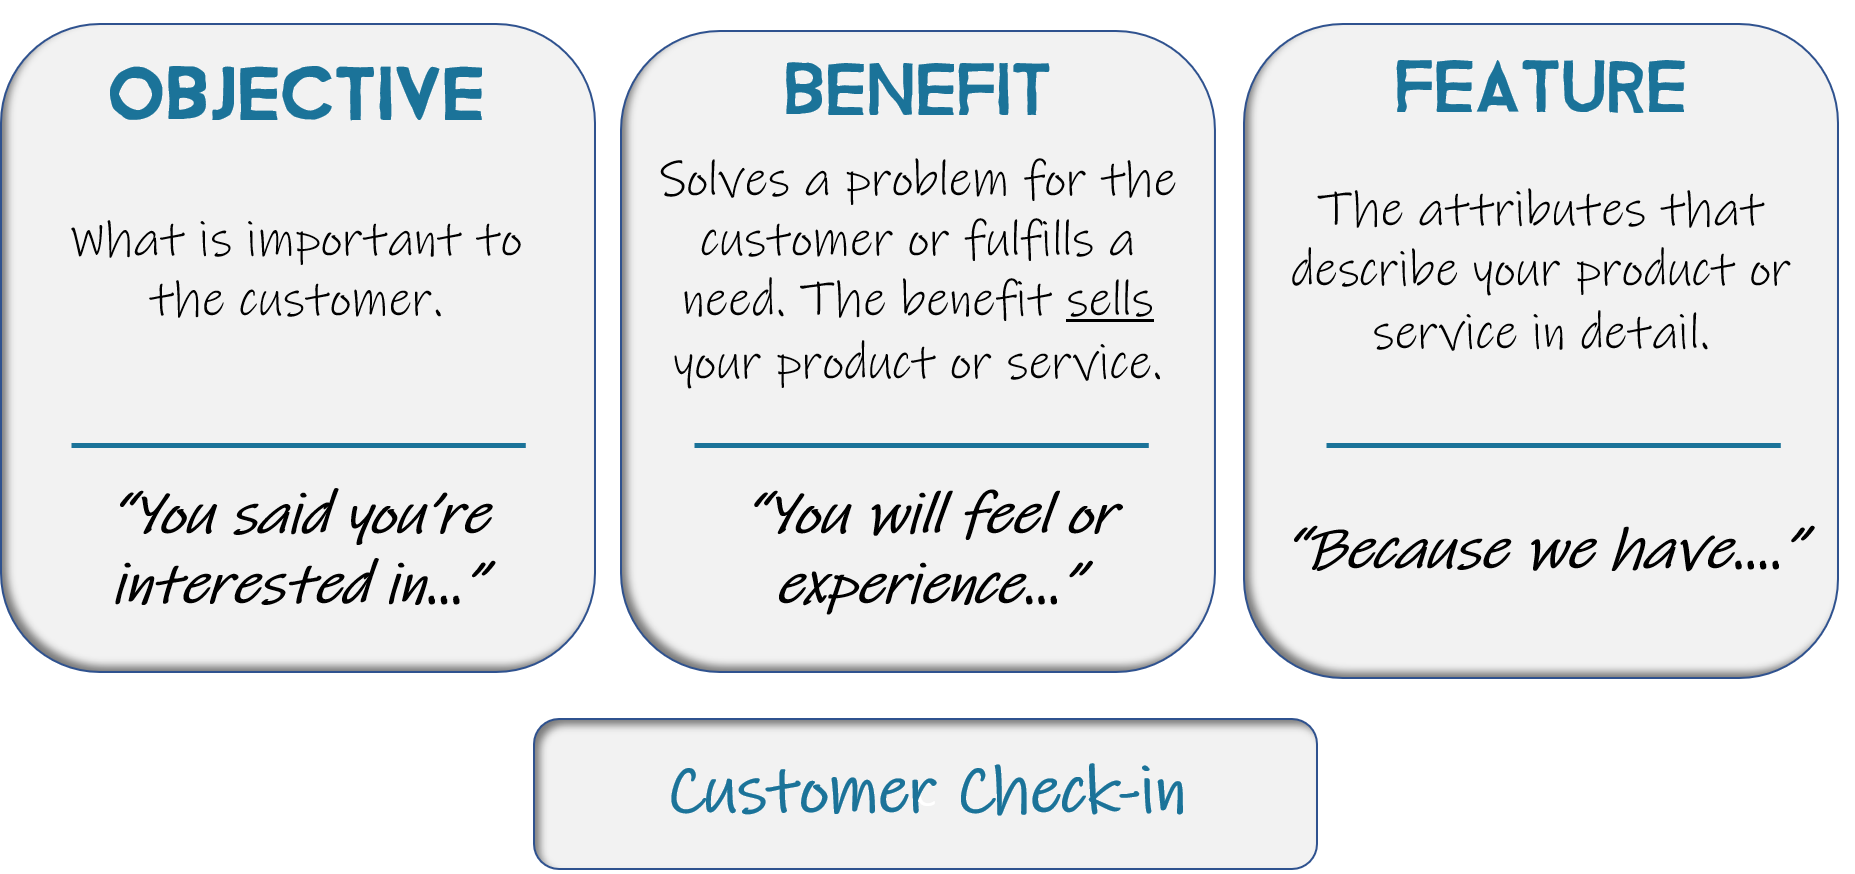 Product Feature Benefit Chart